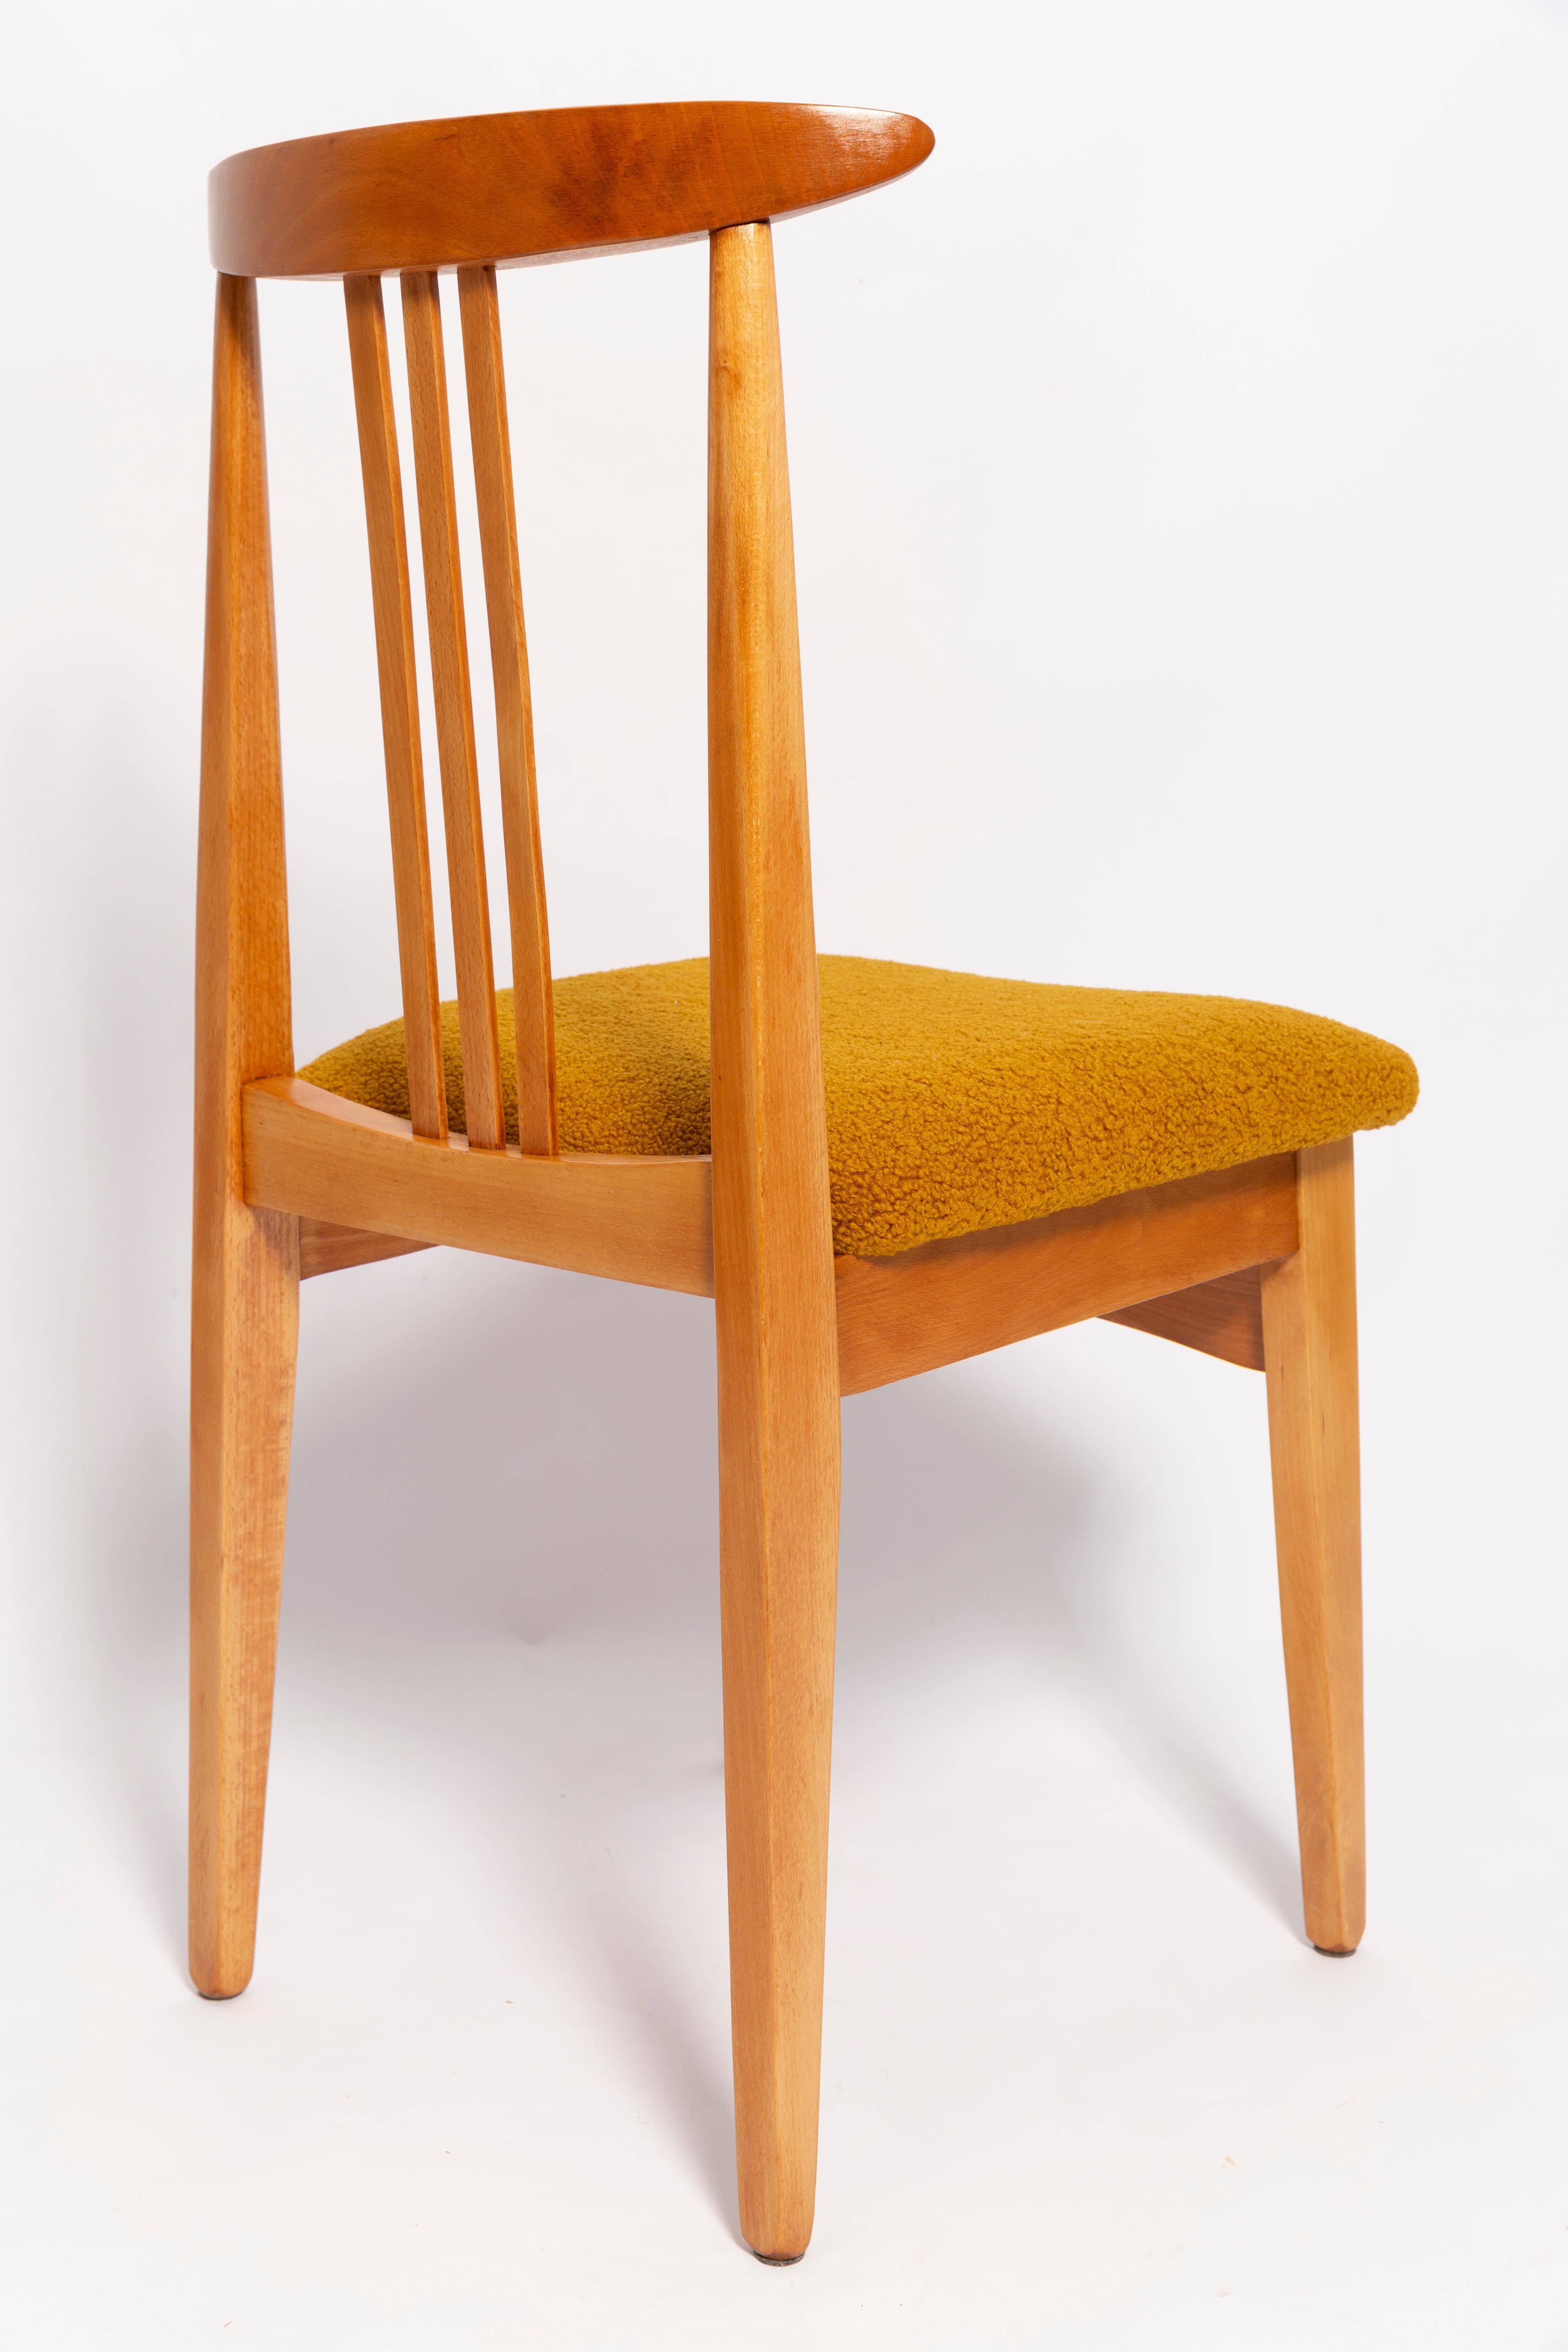 Eight Mid-Century Ochre Boucle Chairs, Light Wood, M. Zielinski, Europe, 1960s In Excellent Condition For Sale In 05-080 Hornowek, PL